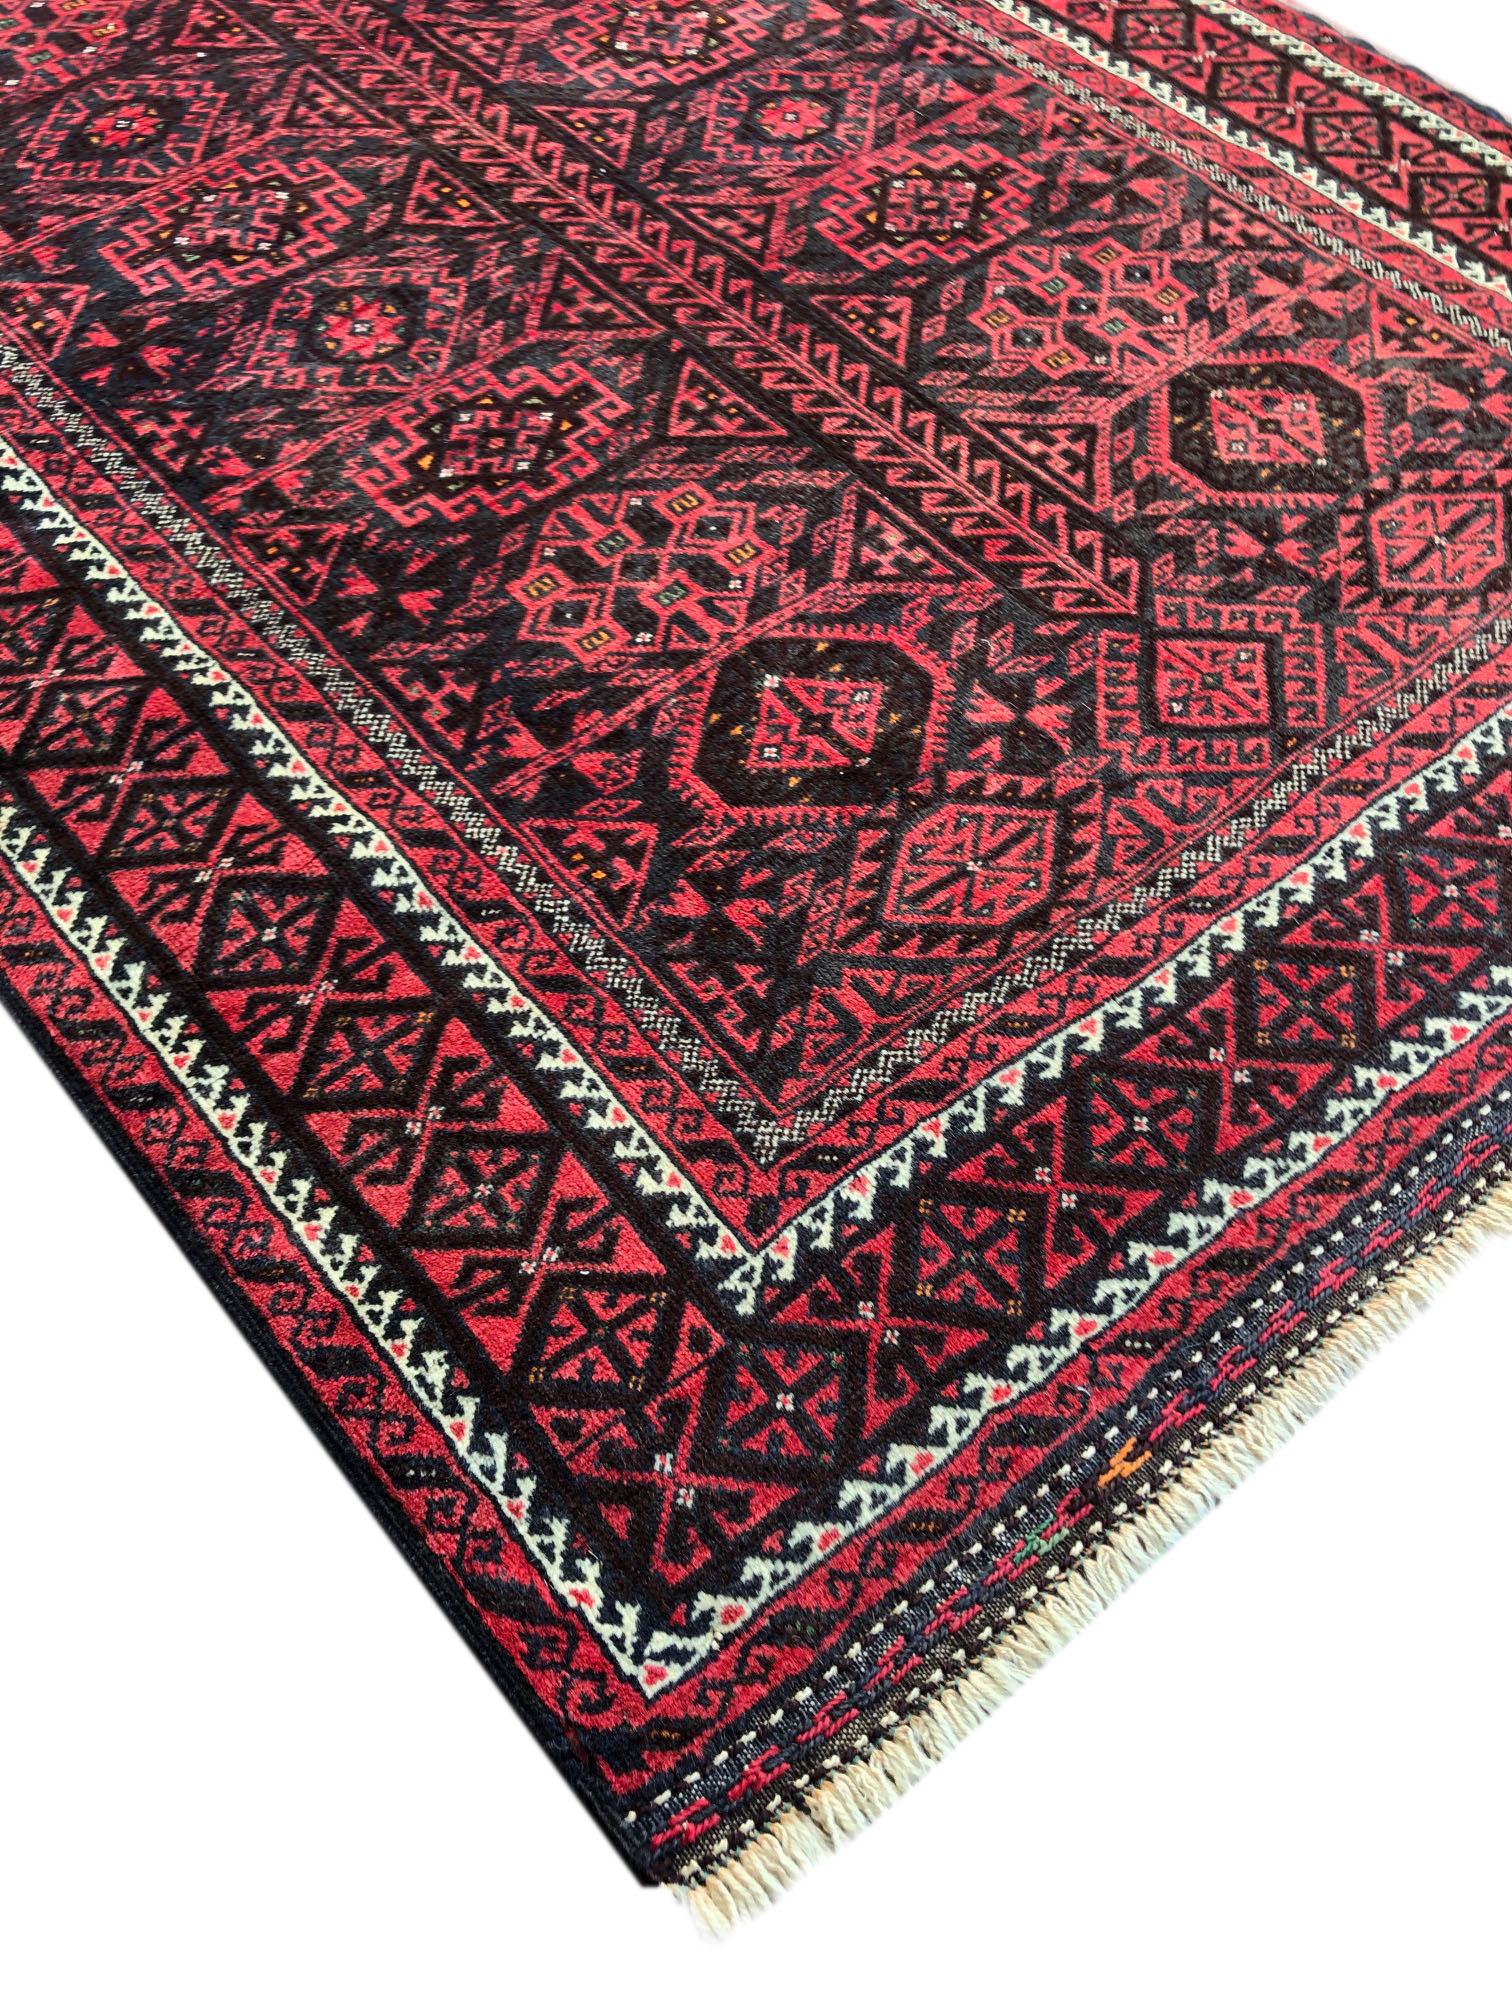 Authentic Persian Hand Knotted Geometric All-Over Red Black Baluchi Rug, 1960 For Sale 3